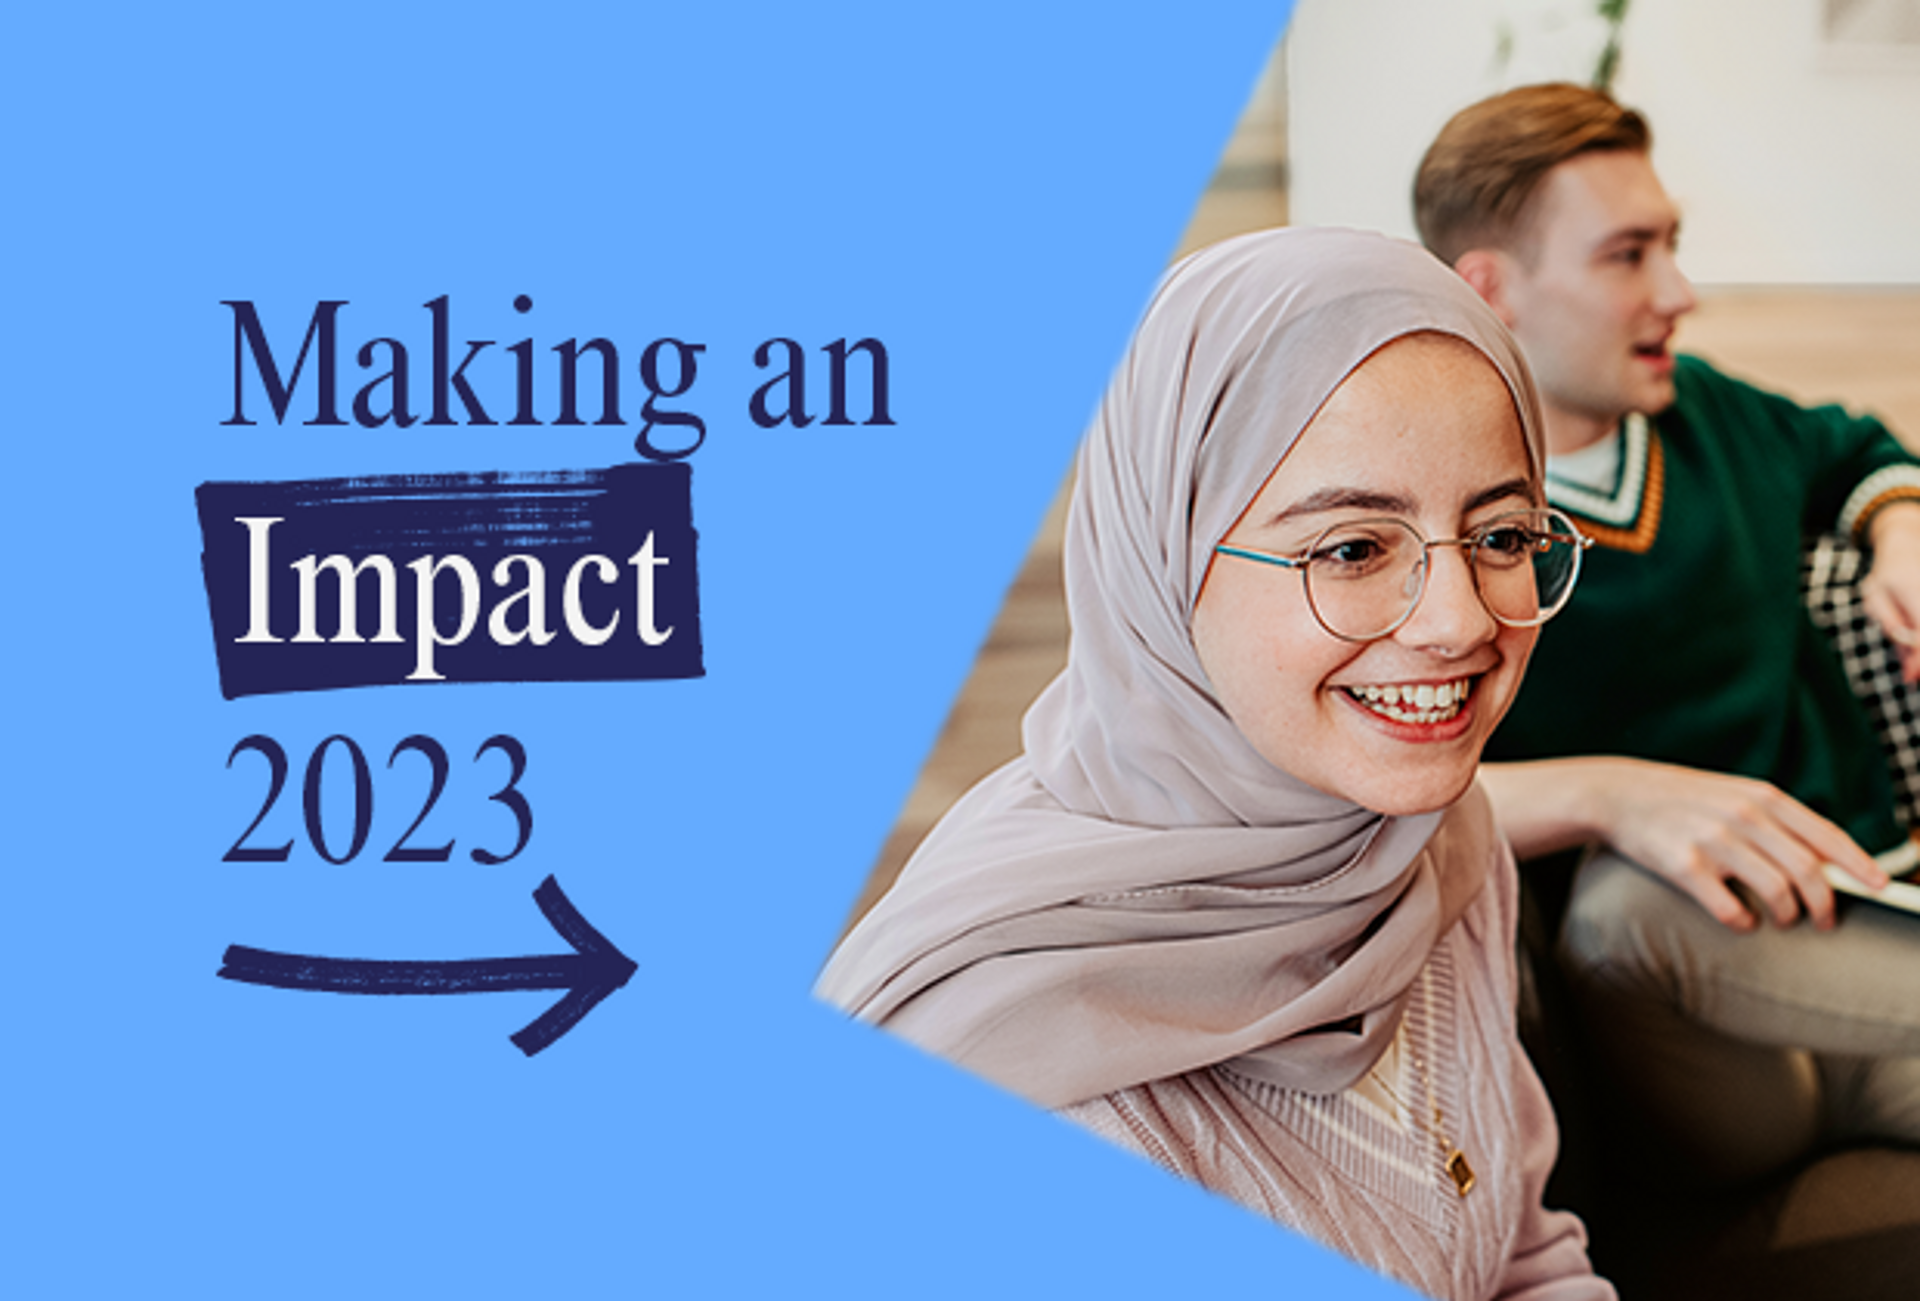 The text: "Making an Impact 2023", with a photograph of an apprentice smiling